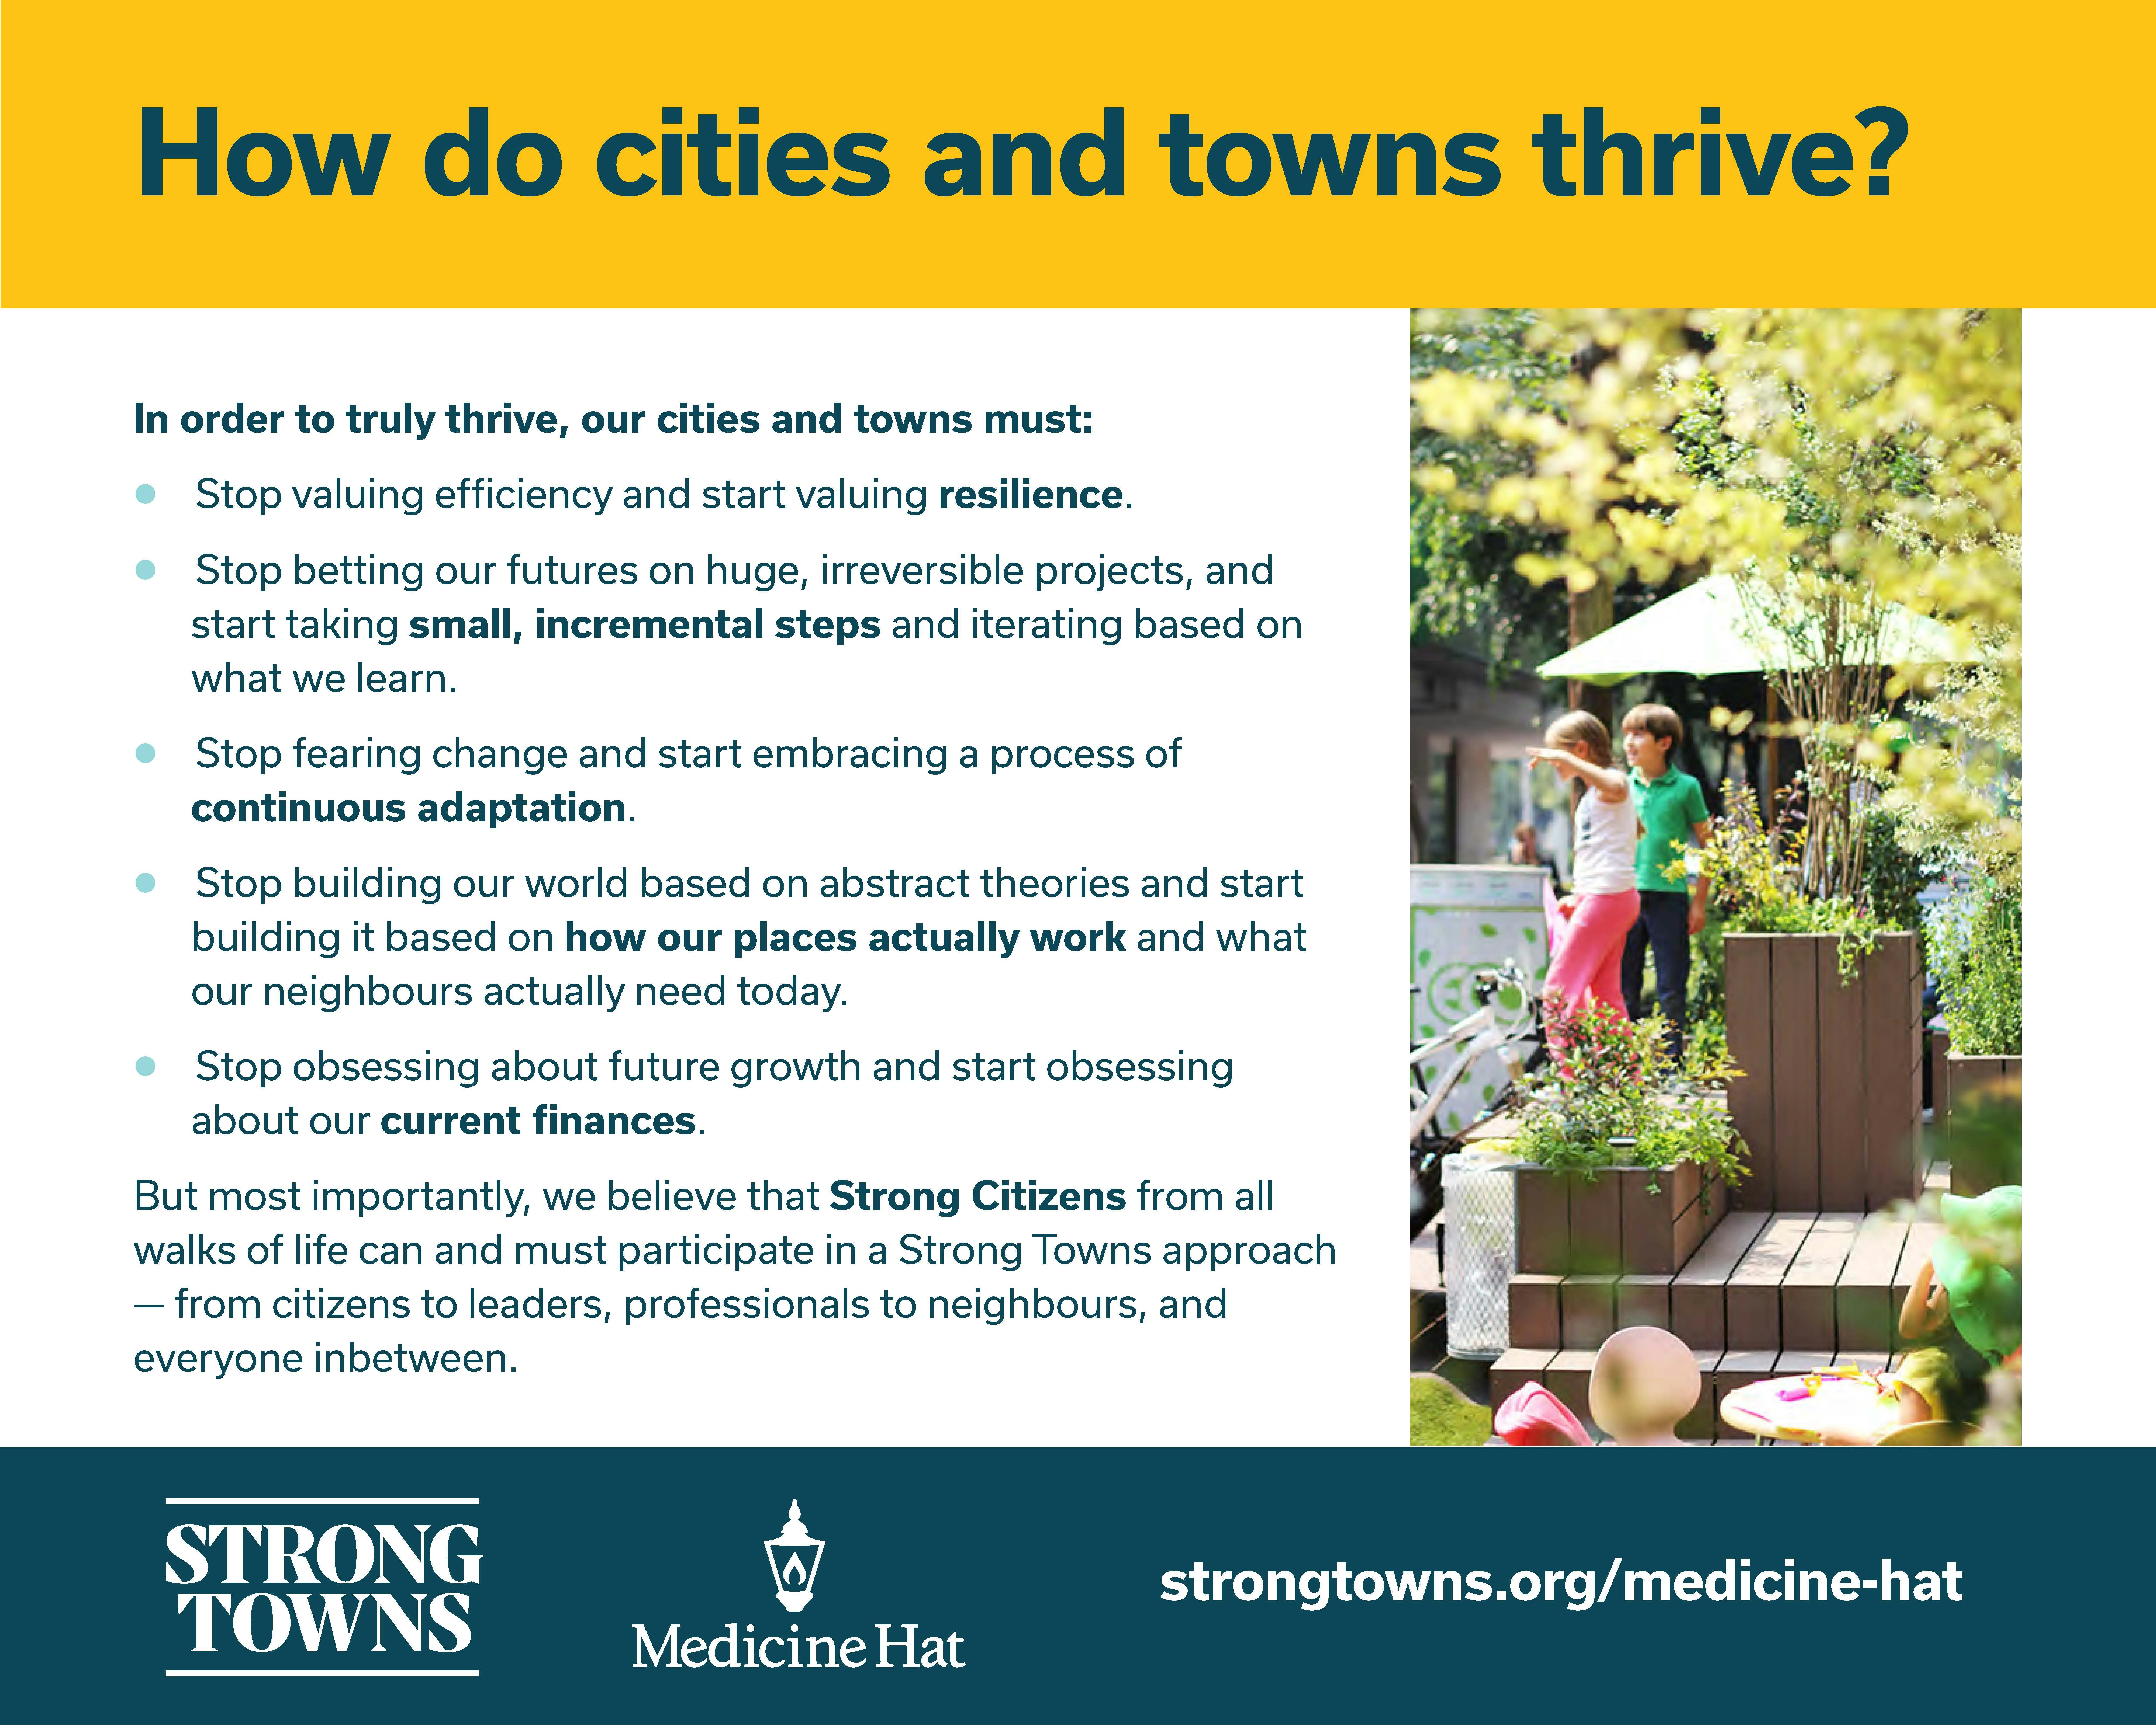 "How do cities and towns thrive" display at the trade show